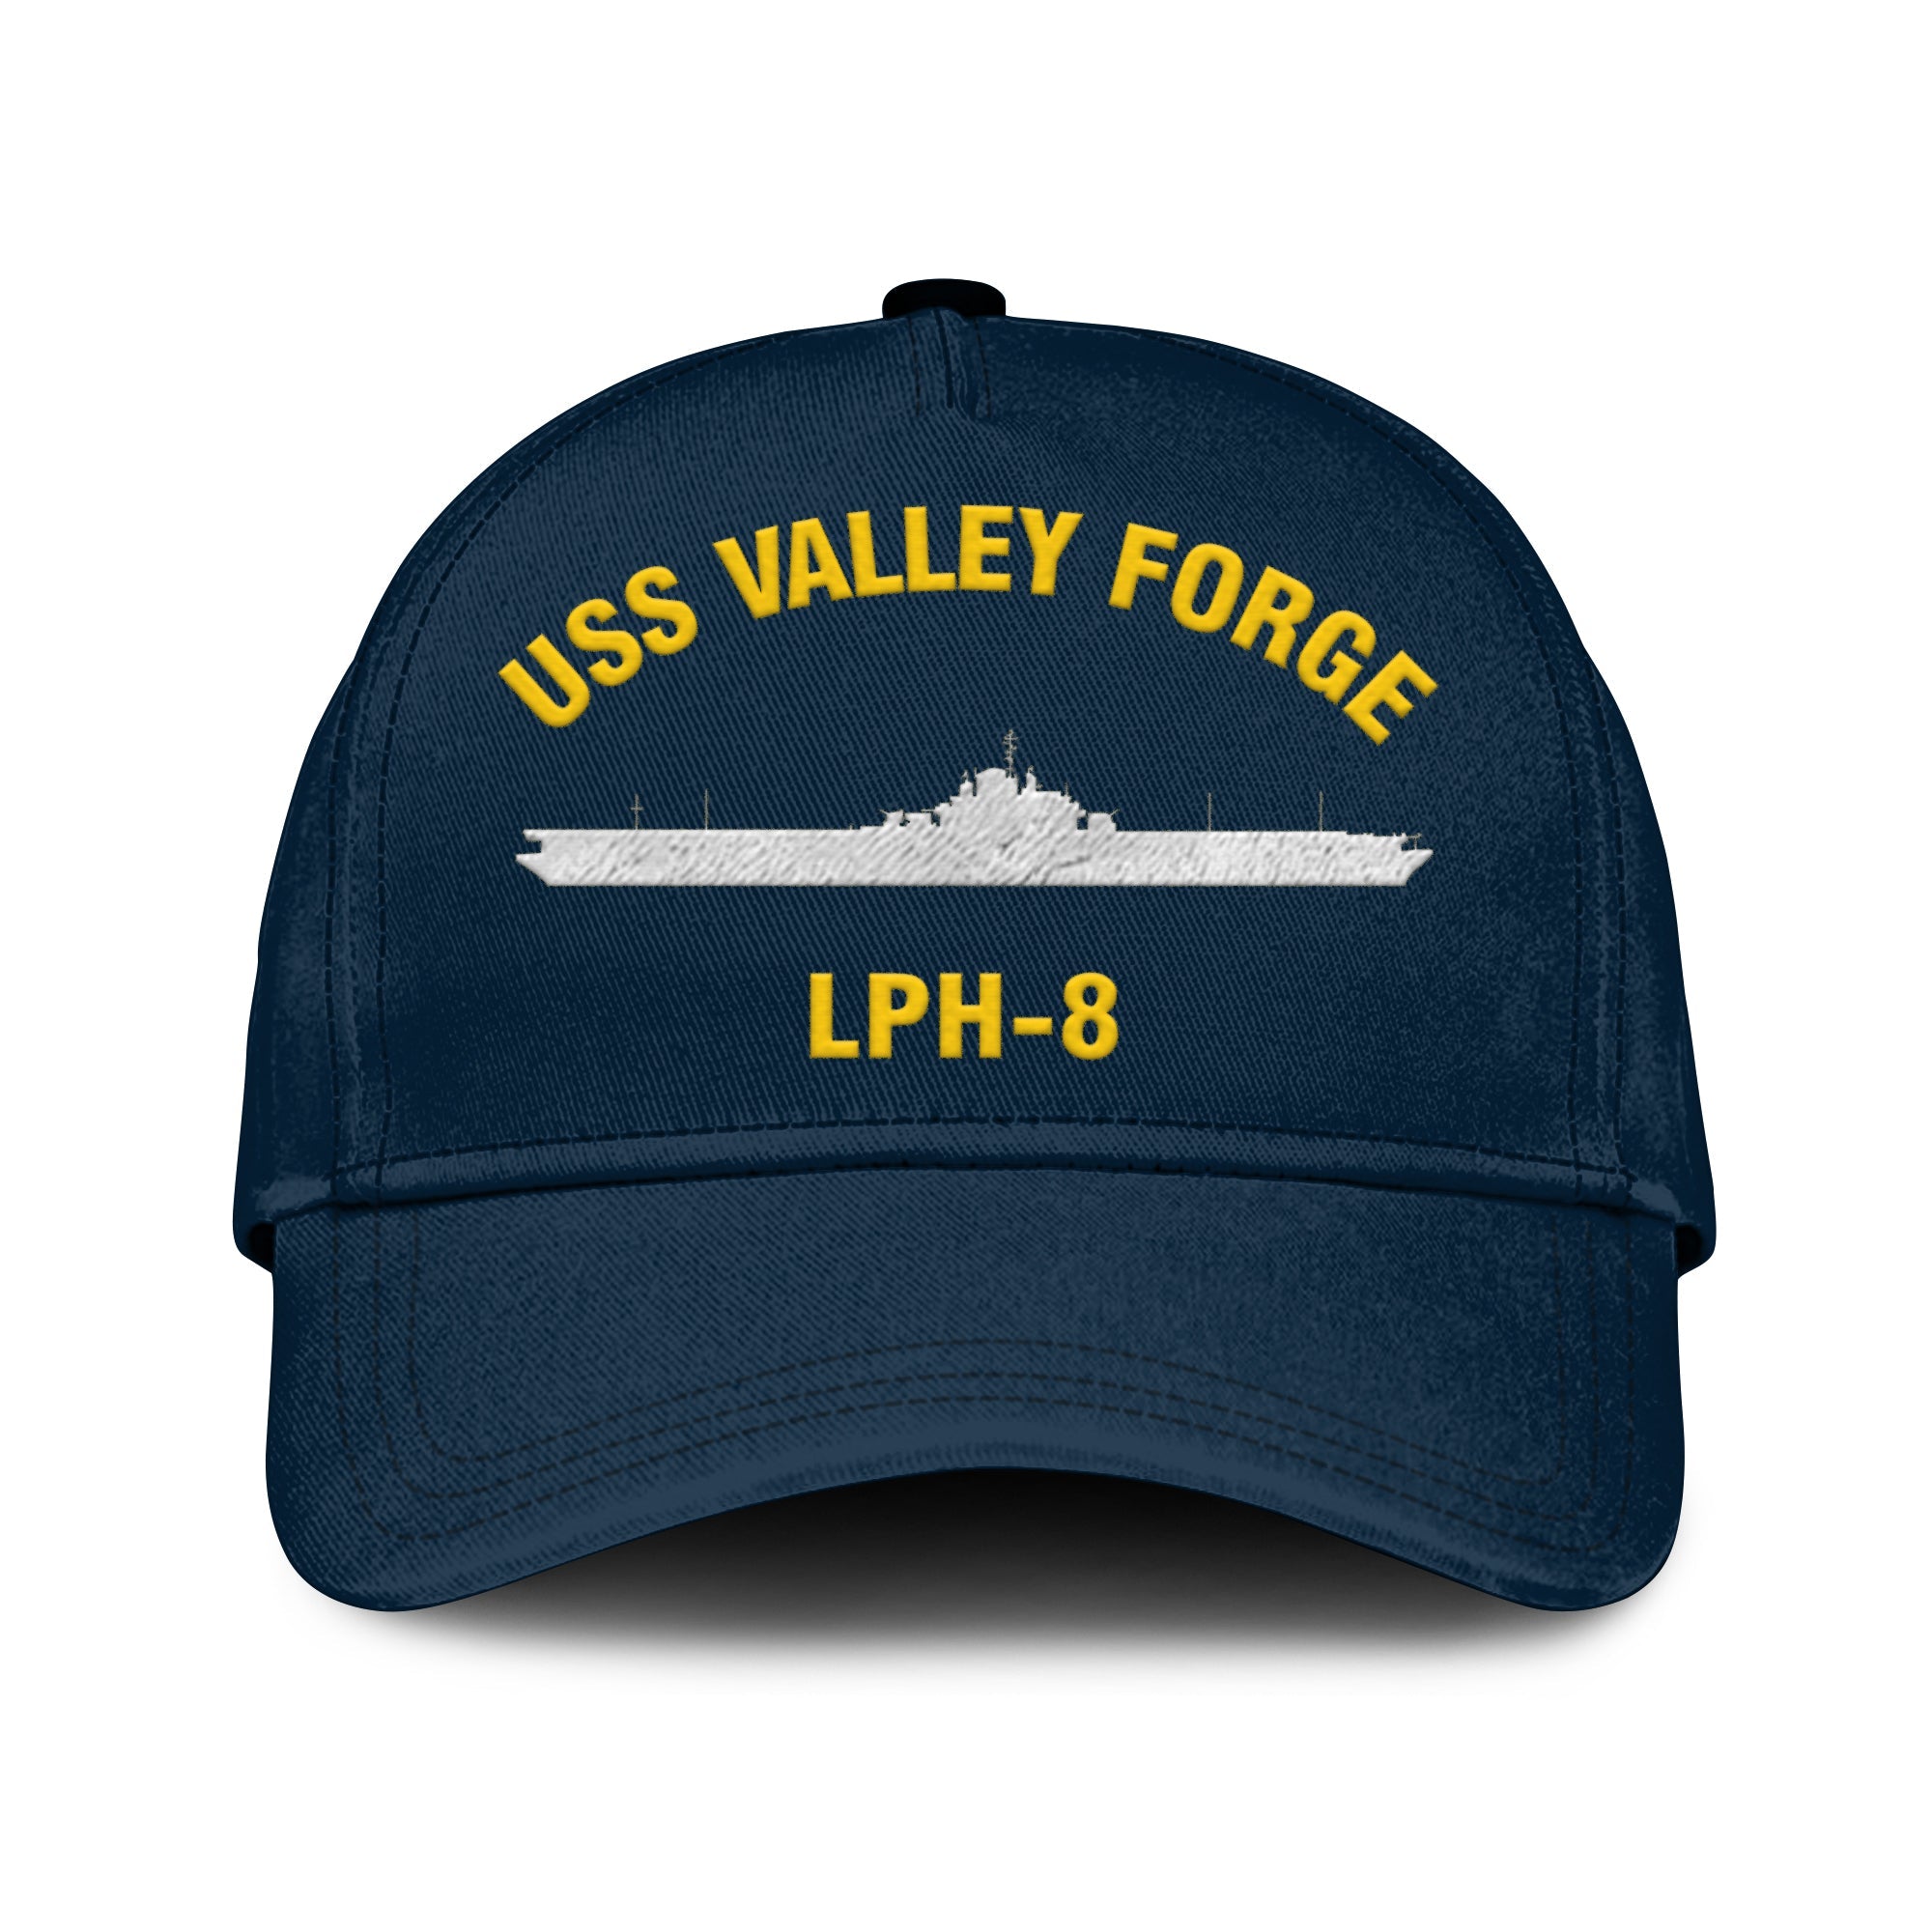 Uss Valley Forge Lph-8 Classic Cap, Custom Print/embroidered Us Navy Ships Classic Baseball Cap, Gift For Navy Veteran